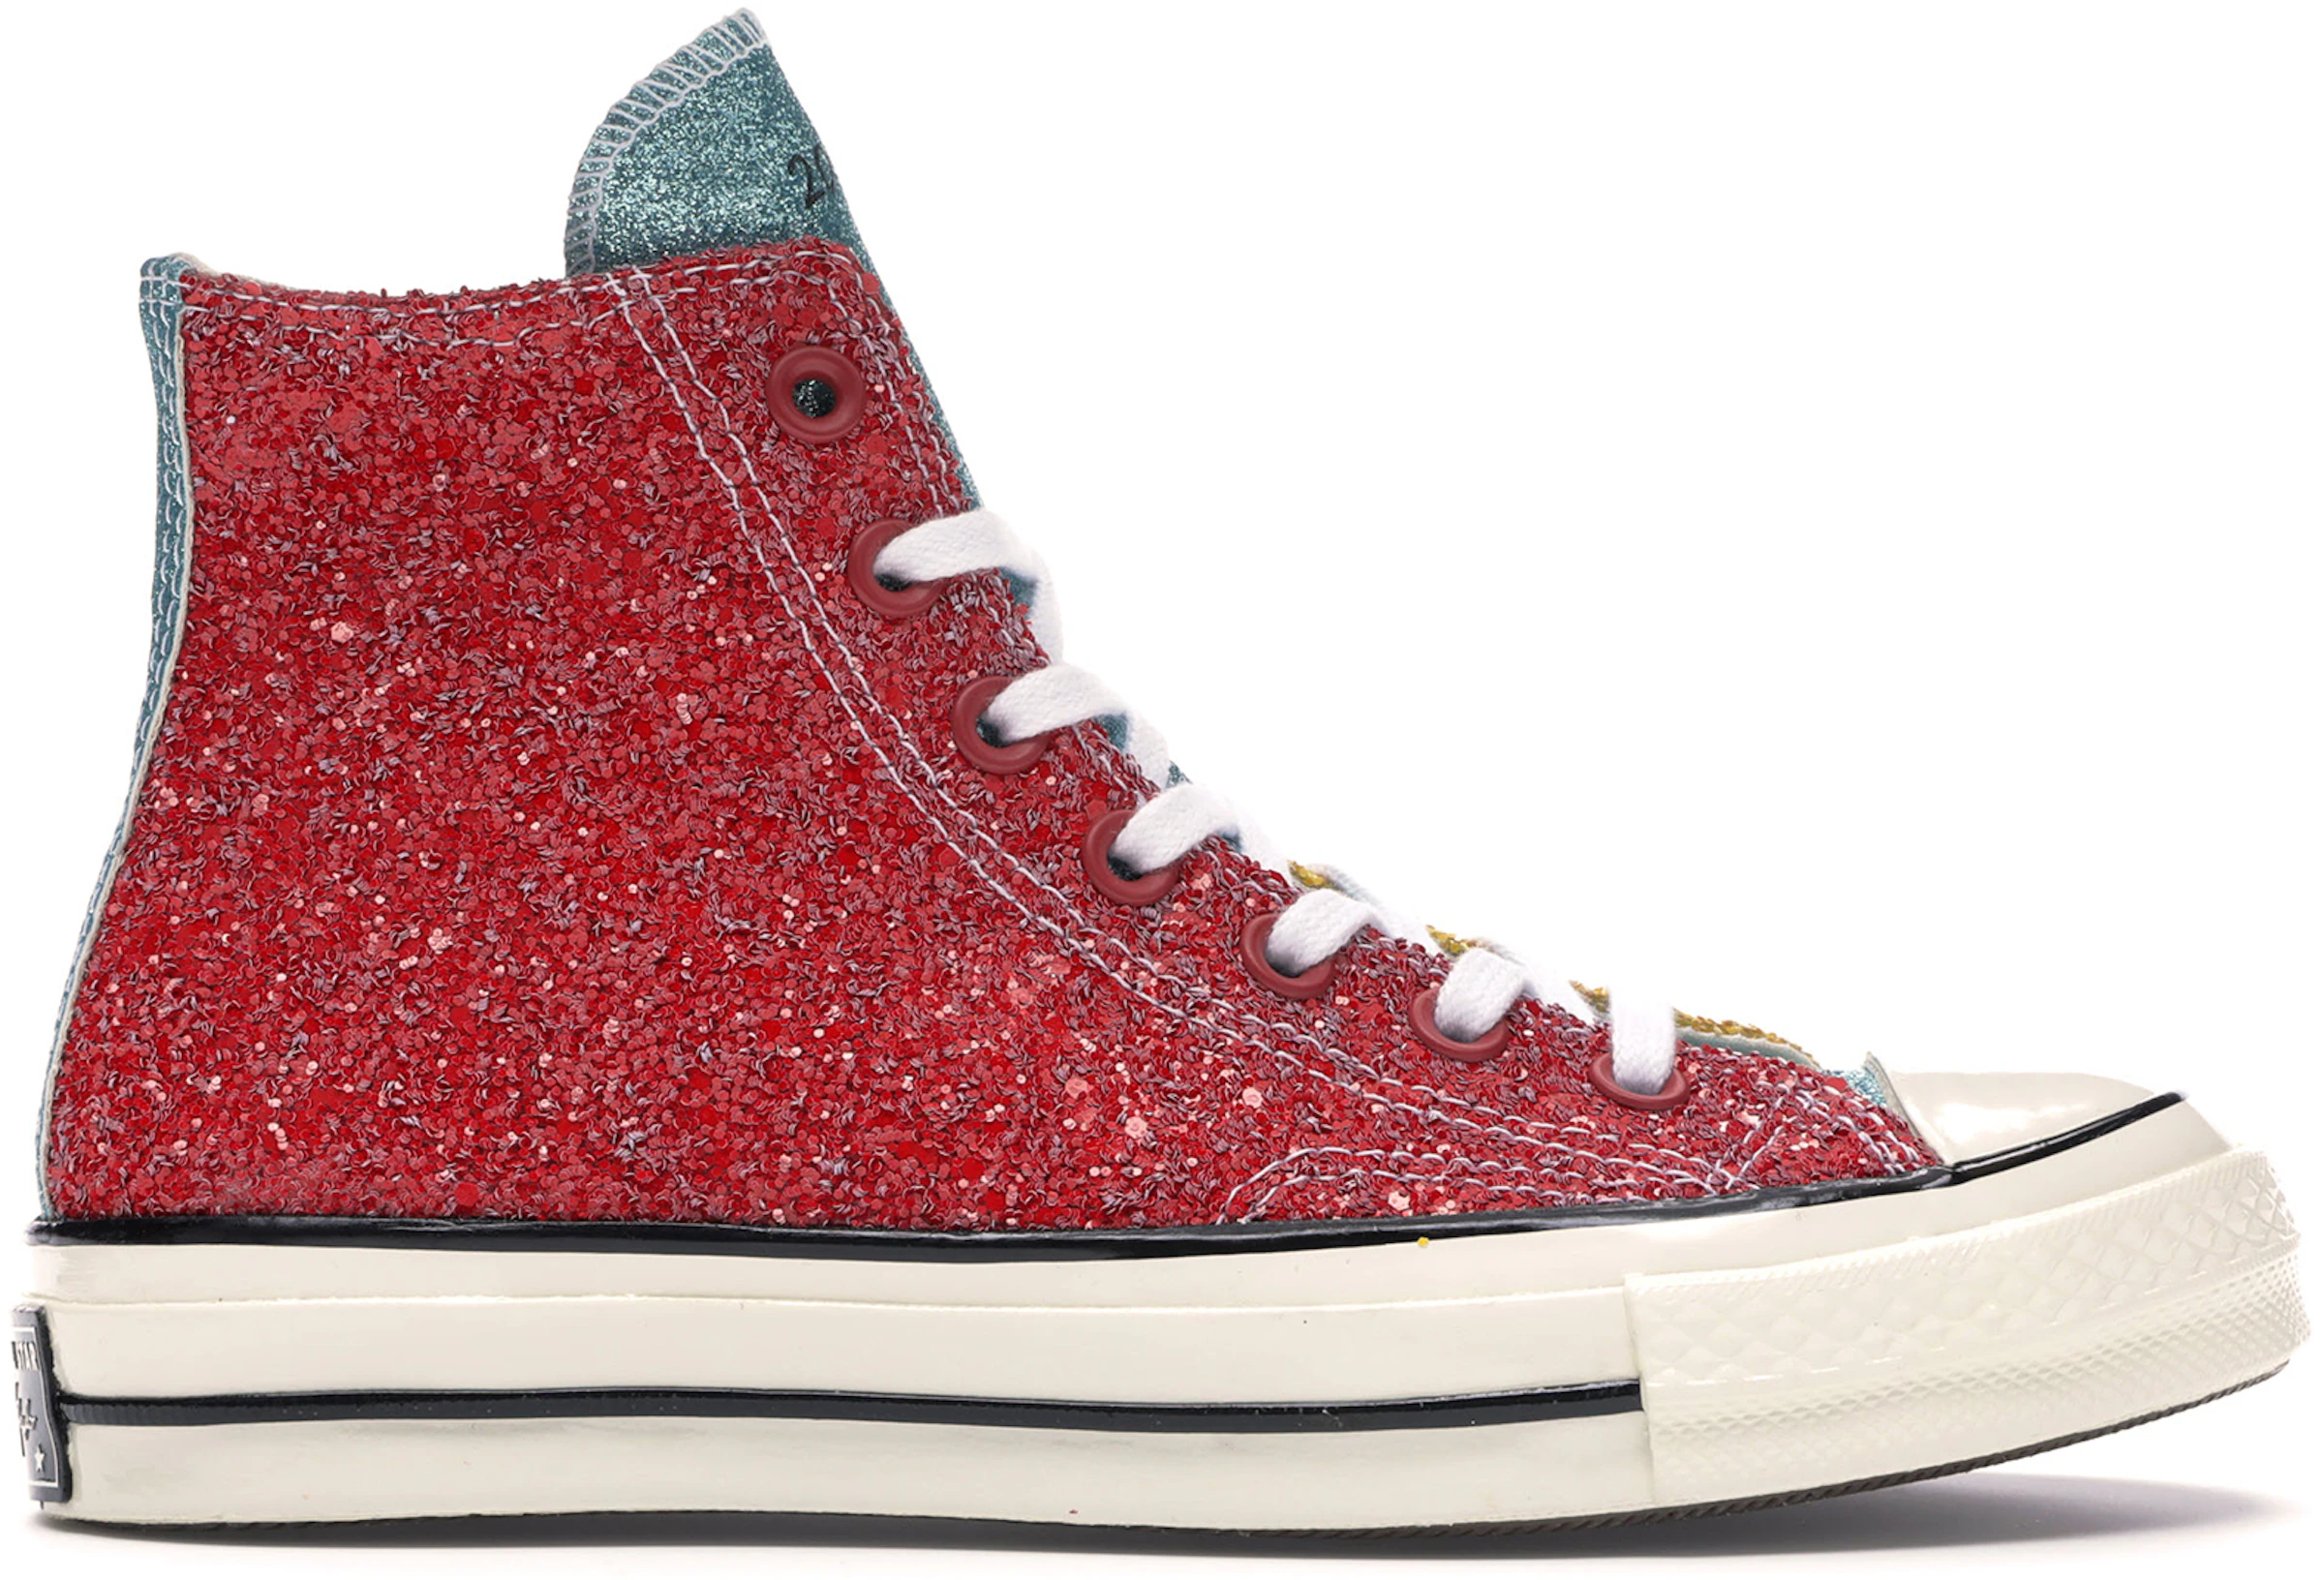 Converse Chuck Taylor All-Star 70 Hi JW Anderson Glitter Yellow Red 164694C - US